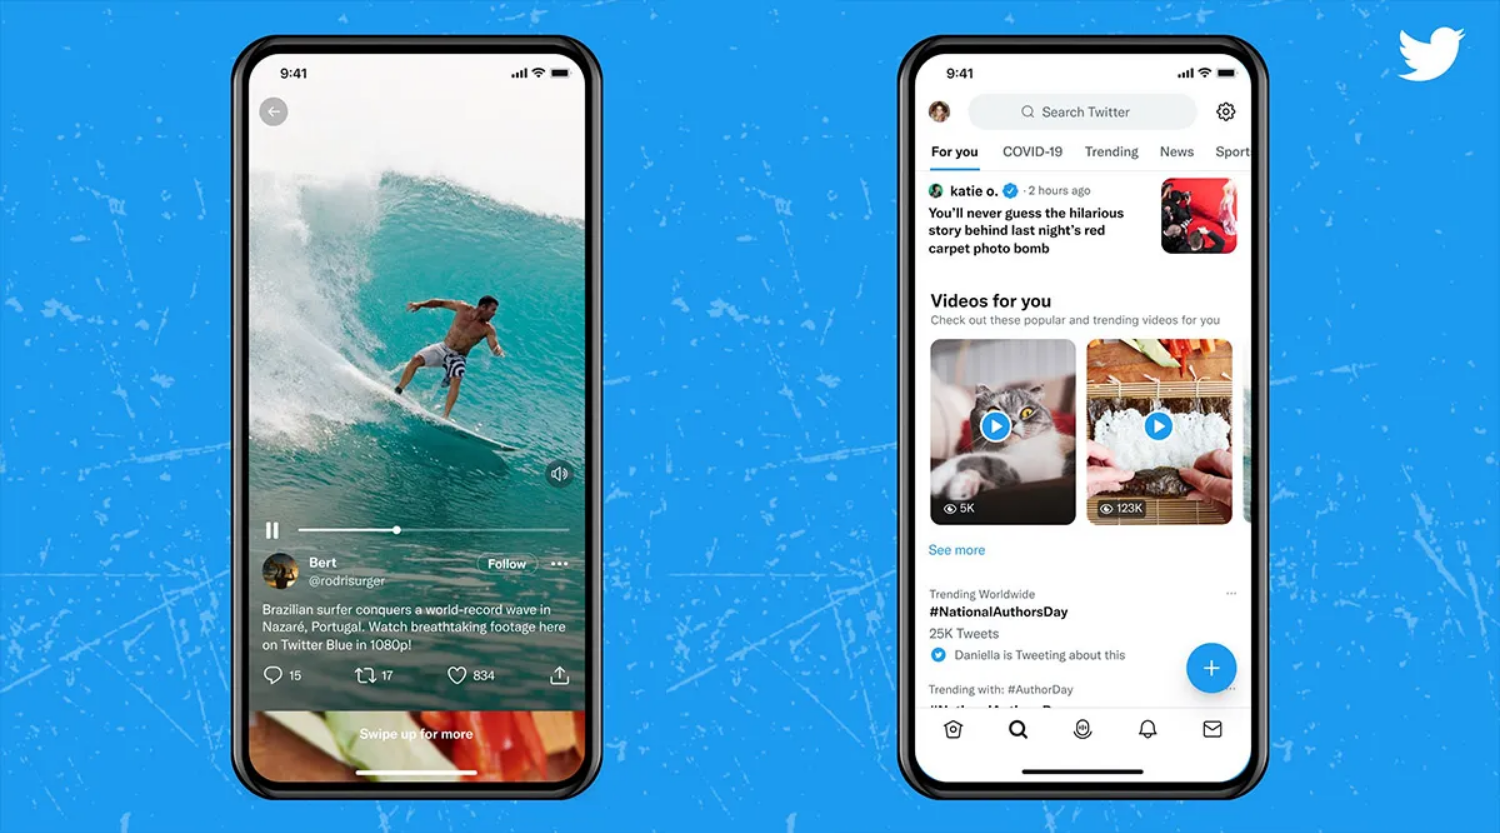 Twitter rolling out Instagram Reels-style vertical video experience to iOS users